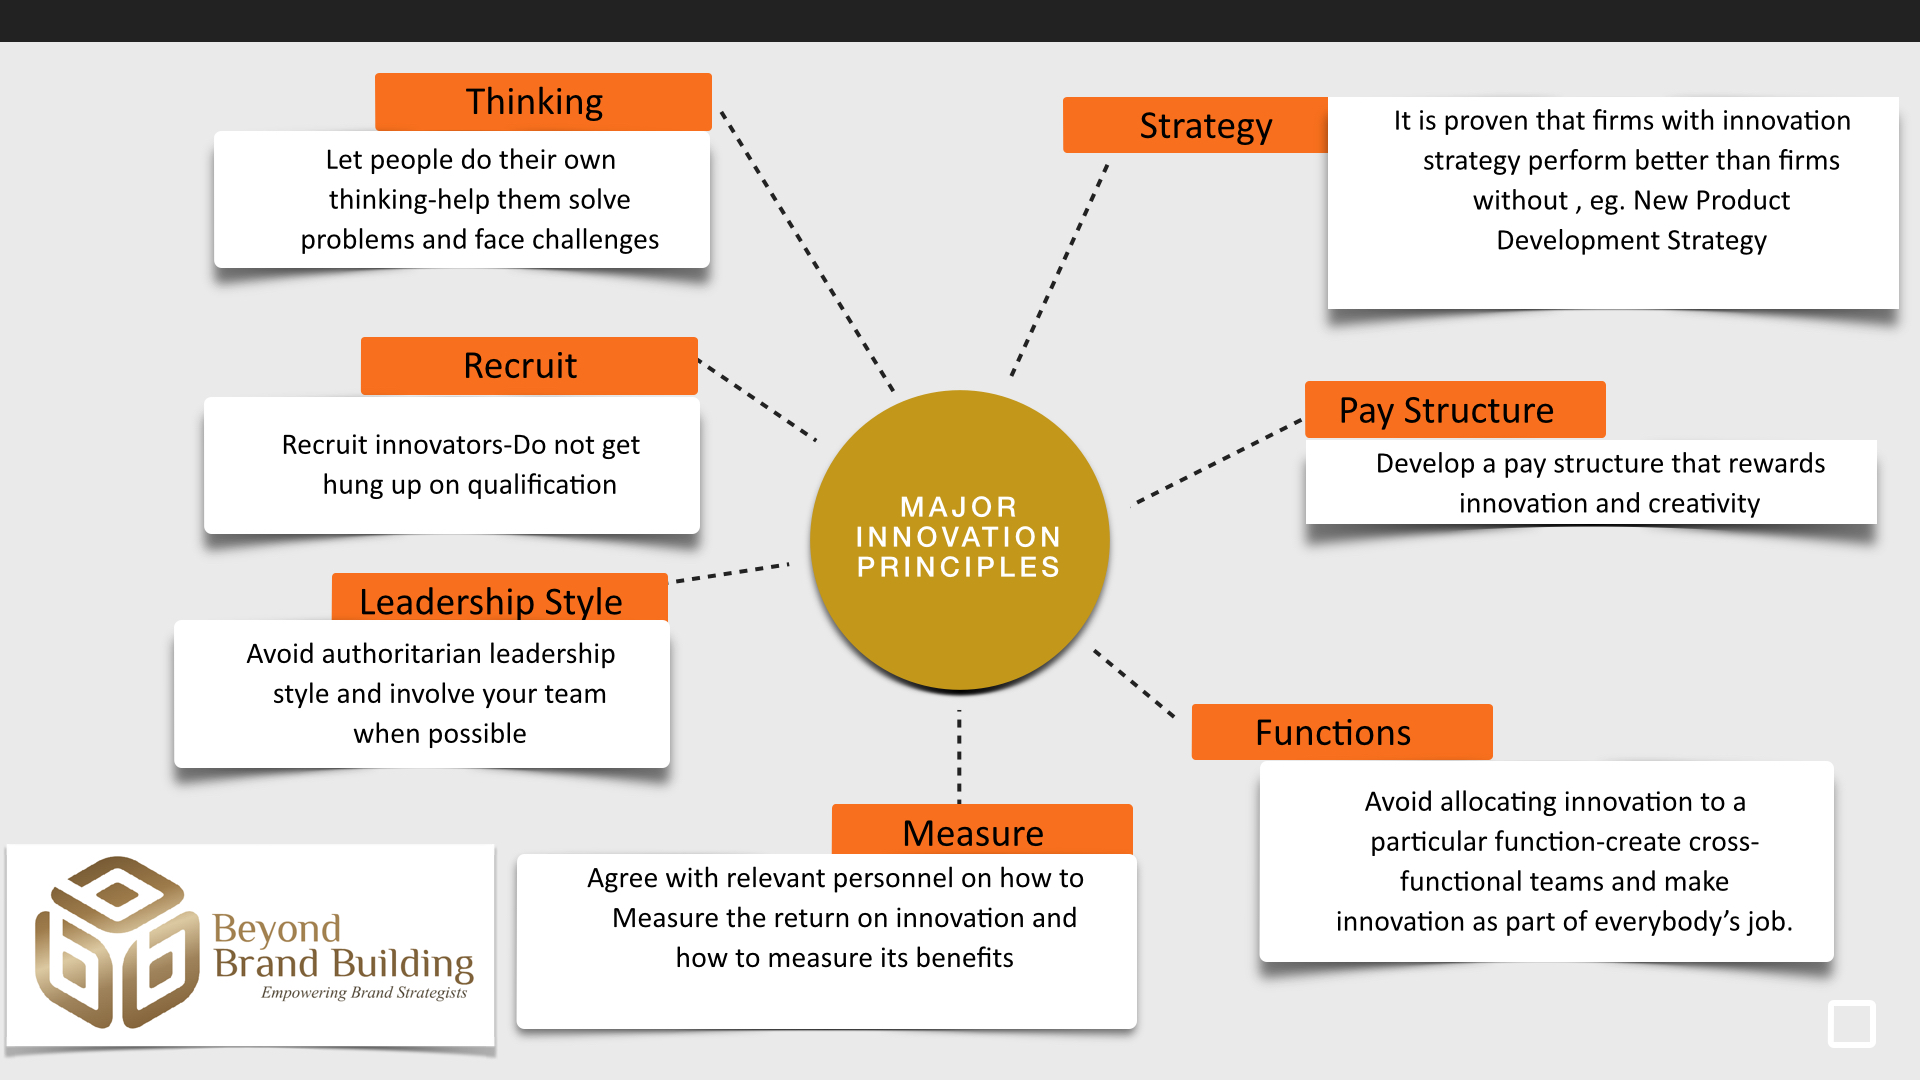 Social Media Strategy & Branding: What Are The Eight Functions of A Brand?